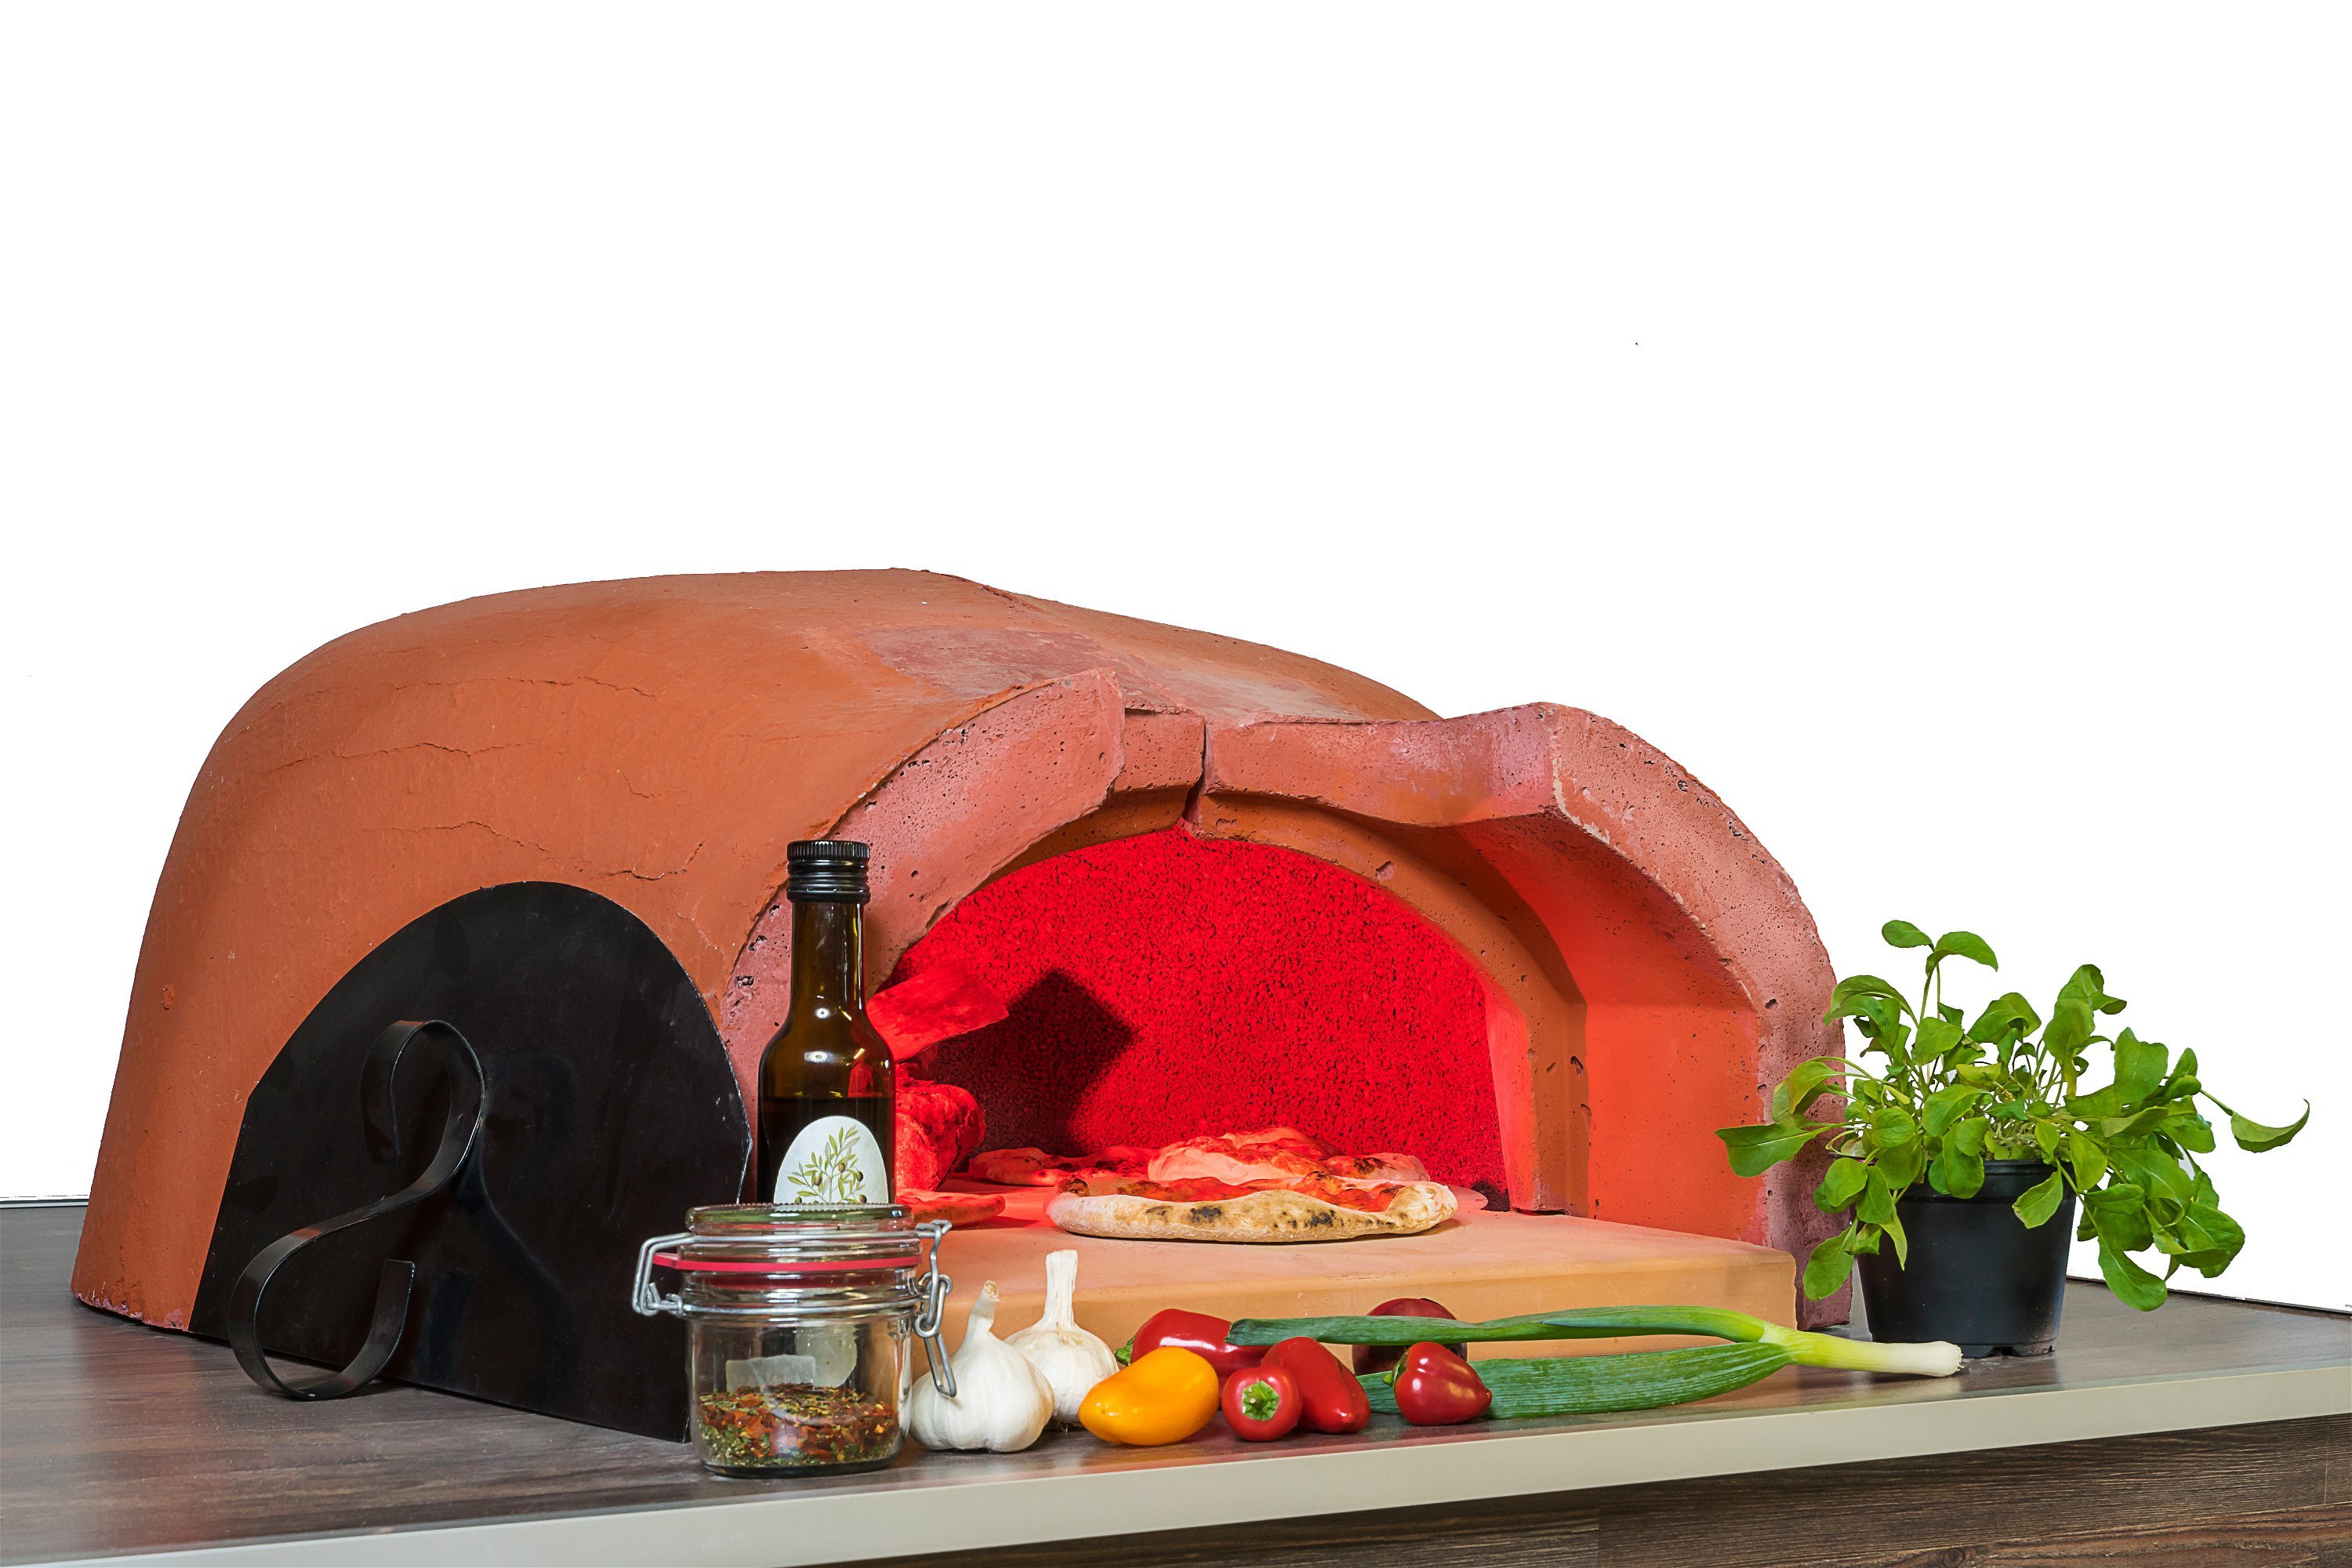 Pizza wood oven kit Valoriani FVR stone oven, 110x110cm baking surface for garden and outdoor kitchens.